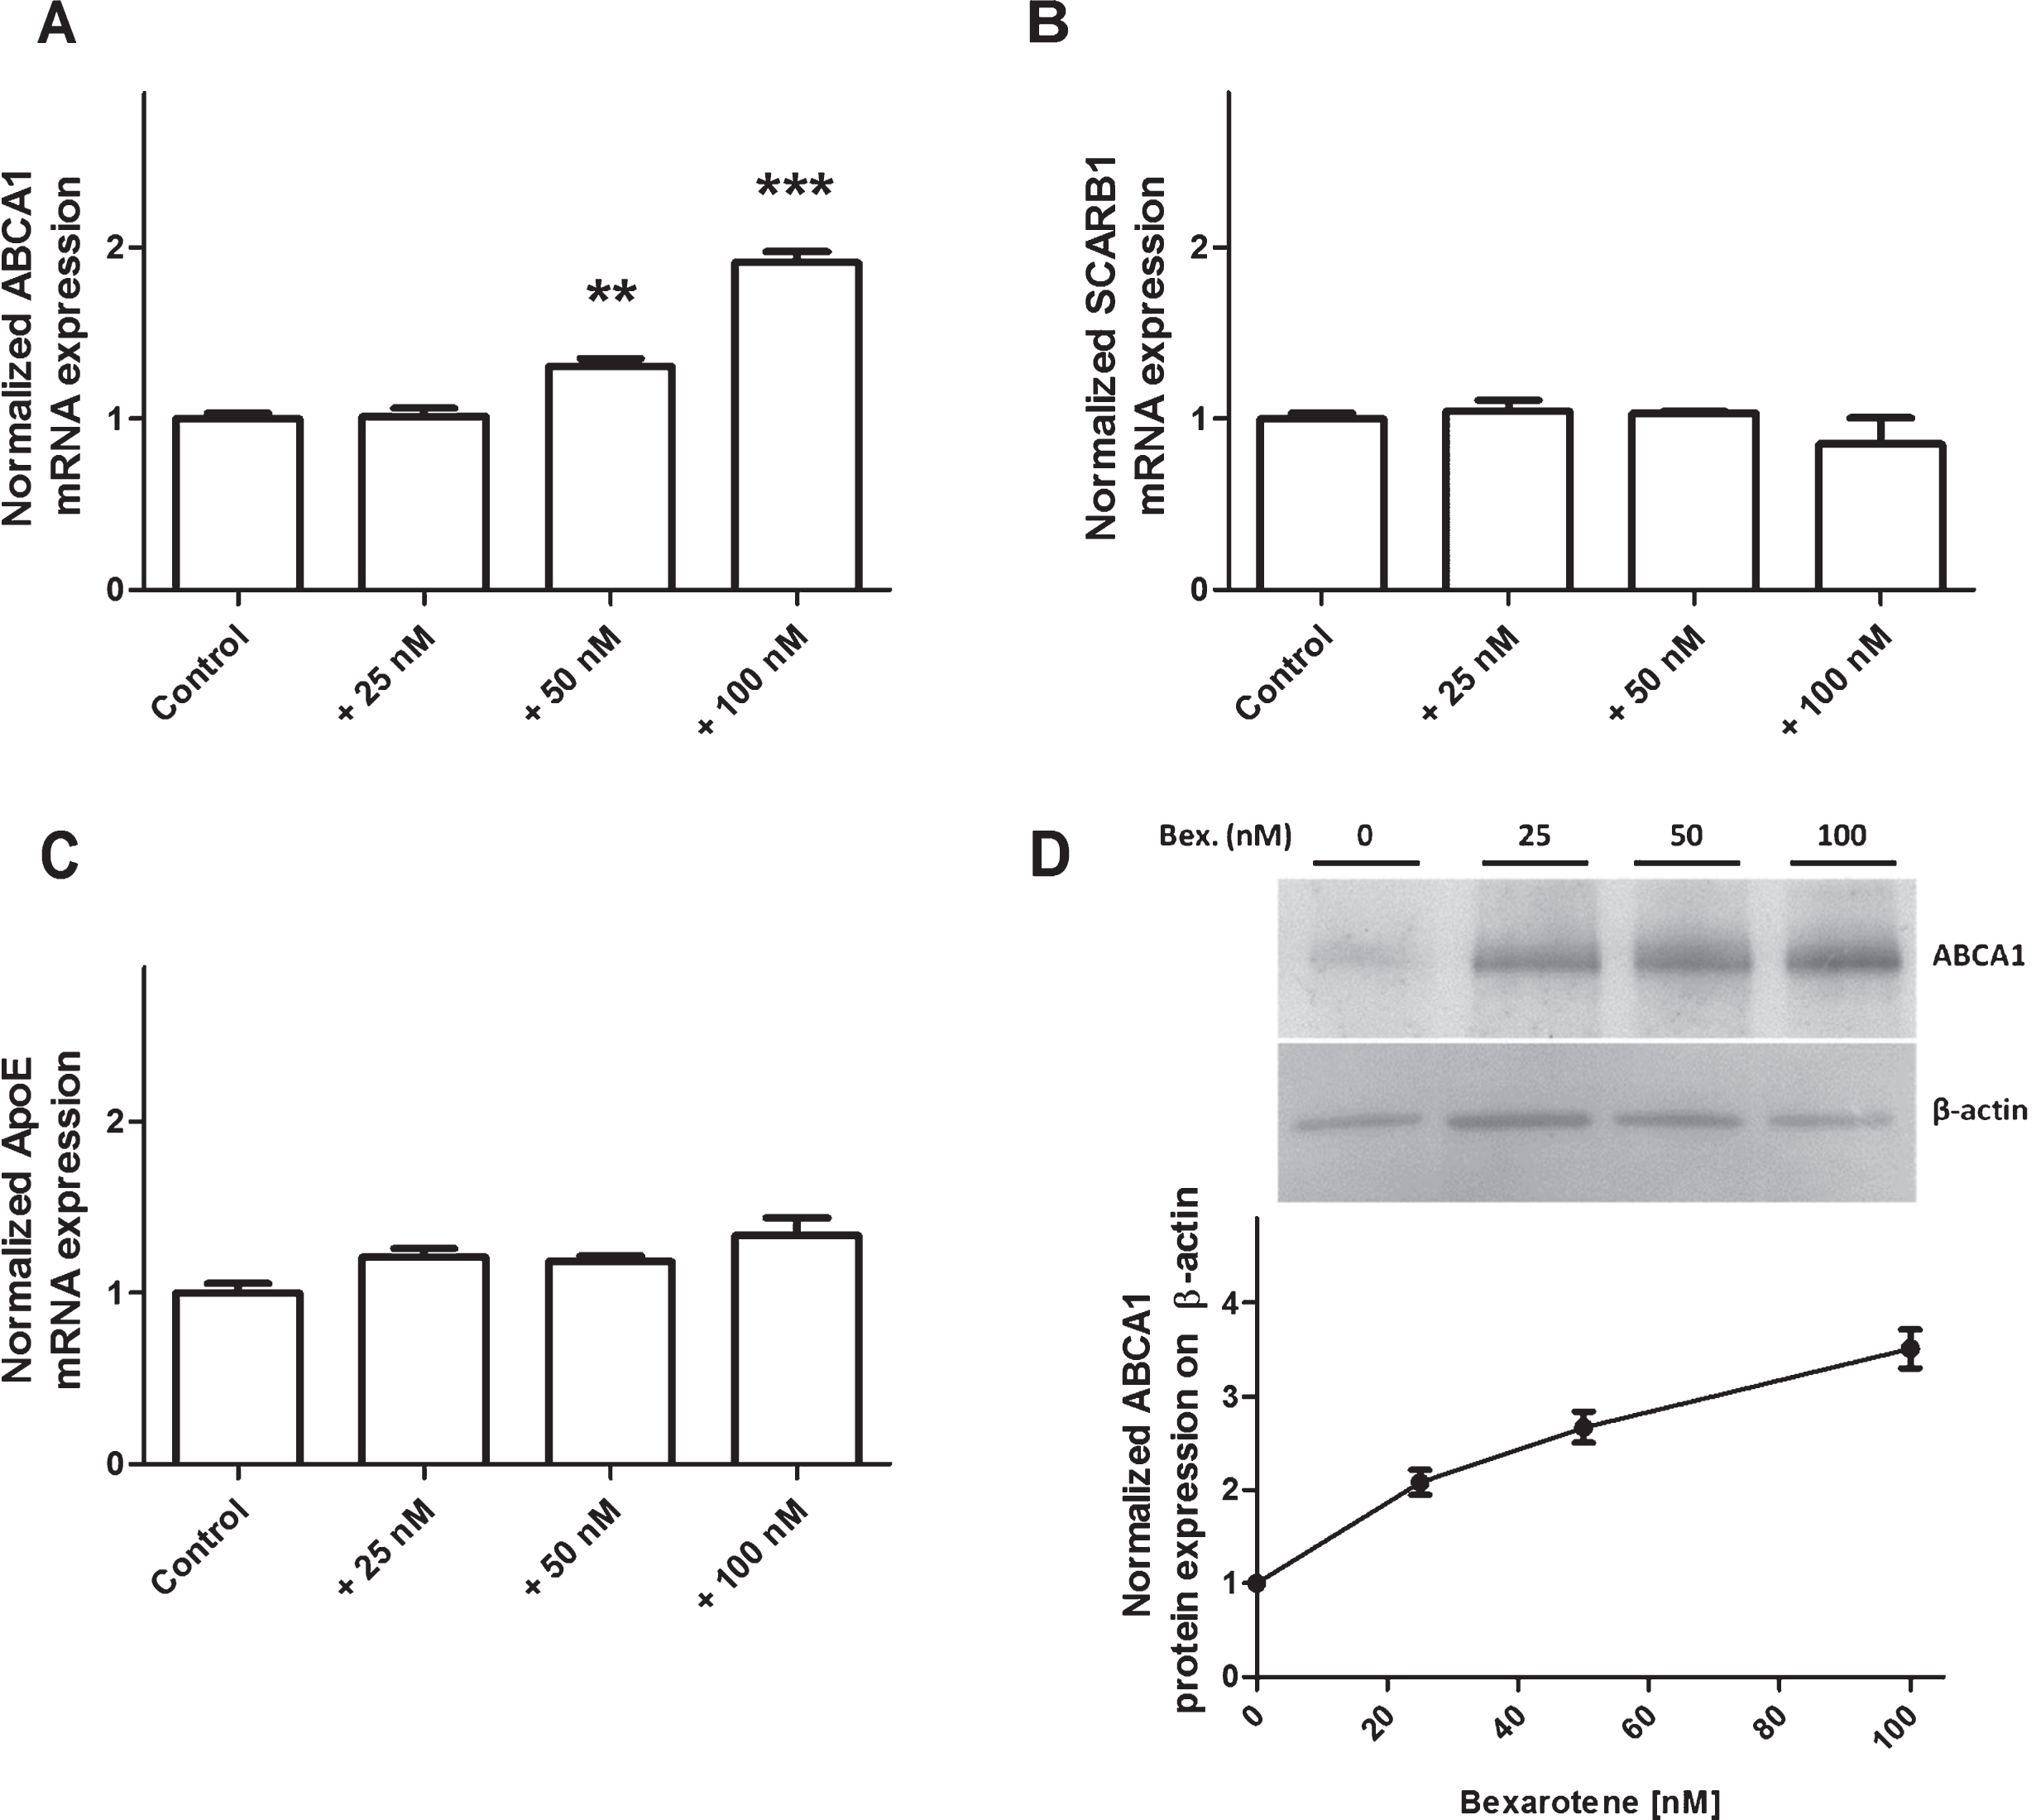 Effect of bexarotene (100 nM) on expression of transporters involved in cholesterol release. Expression levels of ABCA1 (A), SCARB1 (B), and ApoE (C) were analyzed using RT-PCR assays and the primers listed in Table 1. Each bar represents the mRNA expression normalized against the housekeeping genes RPLP0 and ACTB and relative to the control condition. The results correspond to the mean±SEM of three experiments pooled from three filters. Statistical analysis: a one-way ANOVA followed by Dunnett’s test for multiple comparisons, where  *p <  0.05;  **p <  0.01; ***p <  0.001, relative to a DMSO-treated control. D) Normalized protein expression levels for ABCA1 were assessed by immunoblotting, as described in the Material and Methods section. β-actin was used as a loading control. The results correspond to the mean±SD of one experiment performed in triplicate and that was representative of two independent experiments.